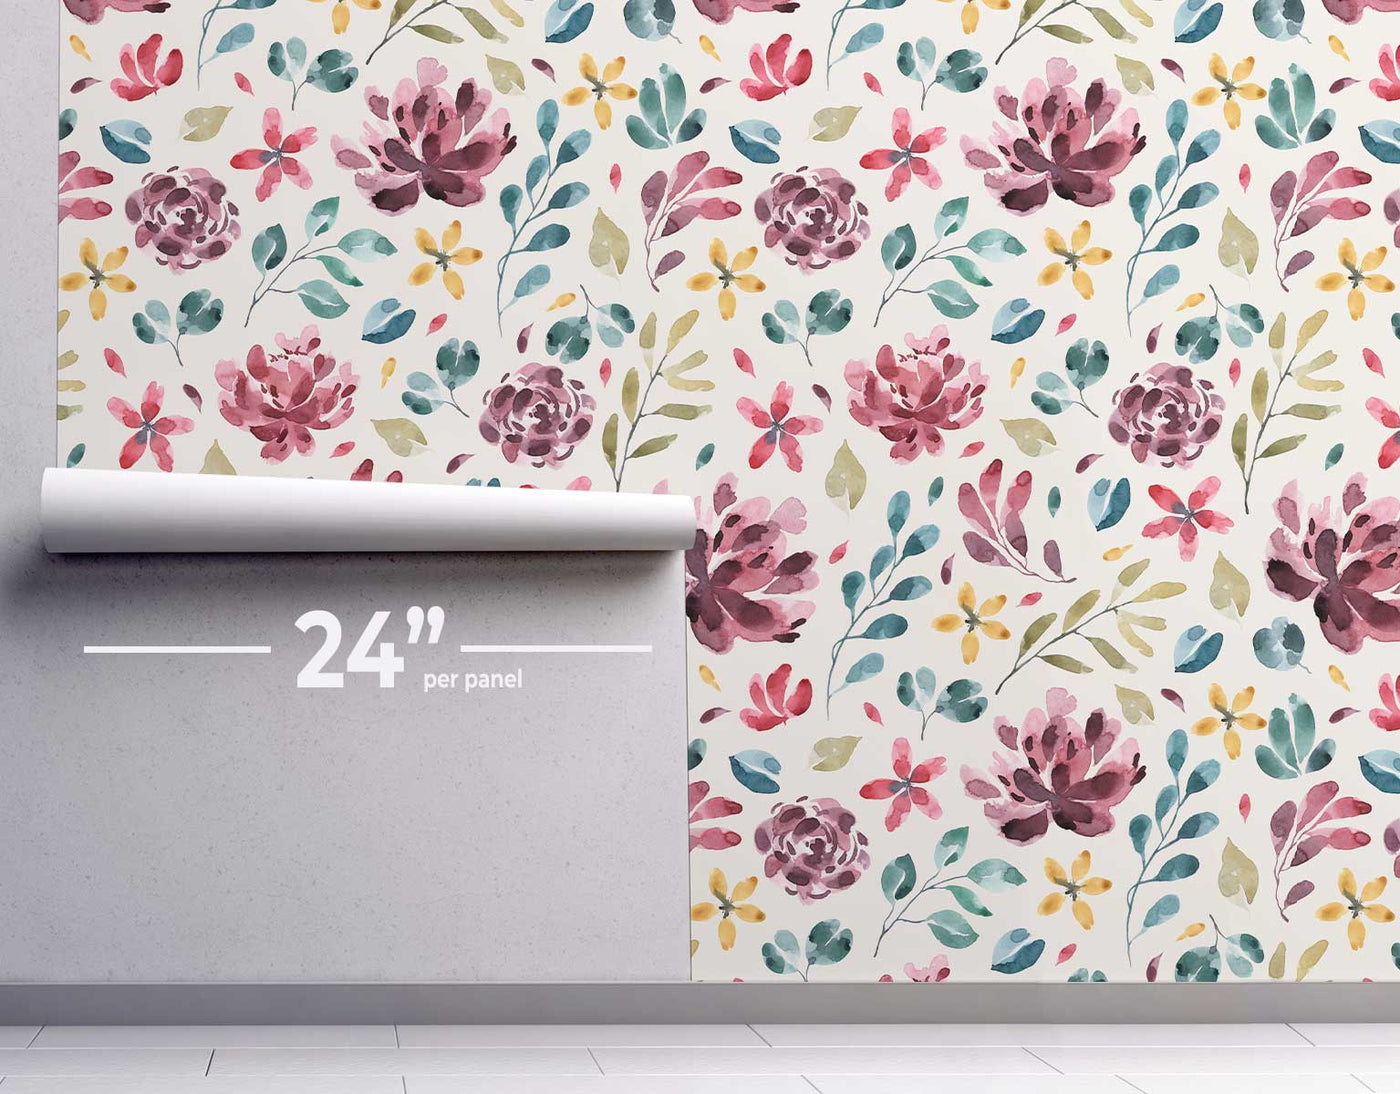 Water Color Rainbow Floral Wallpaper #443-Repeat Pattern Wallpaper-Eazywallz